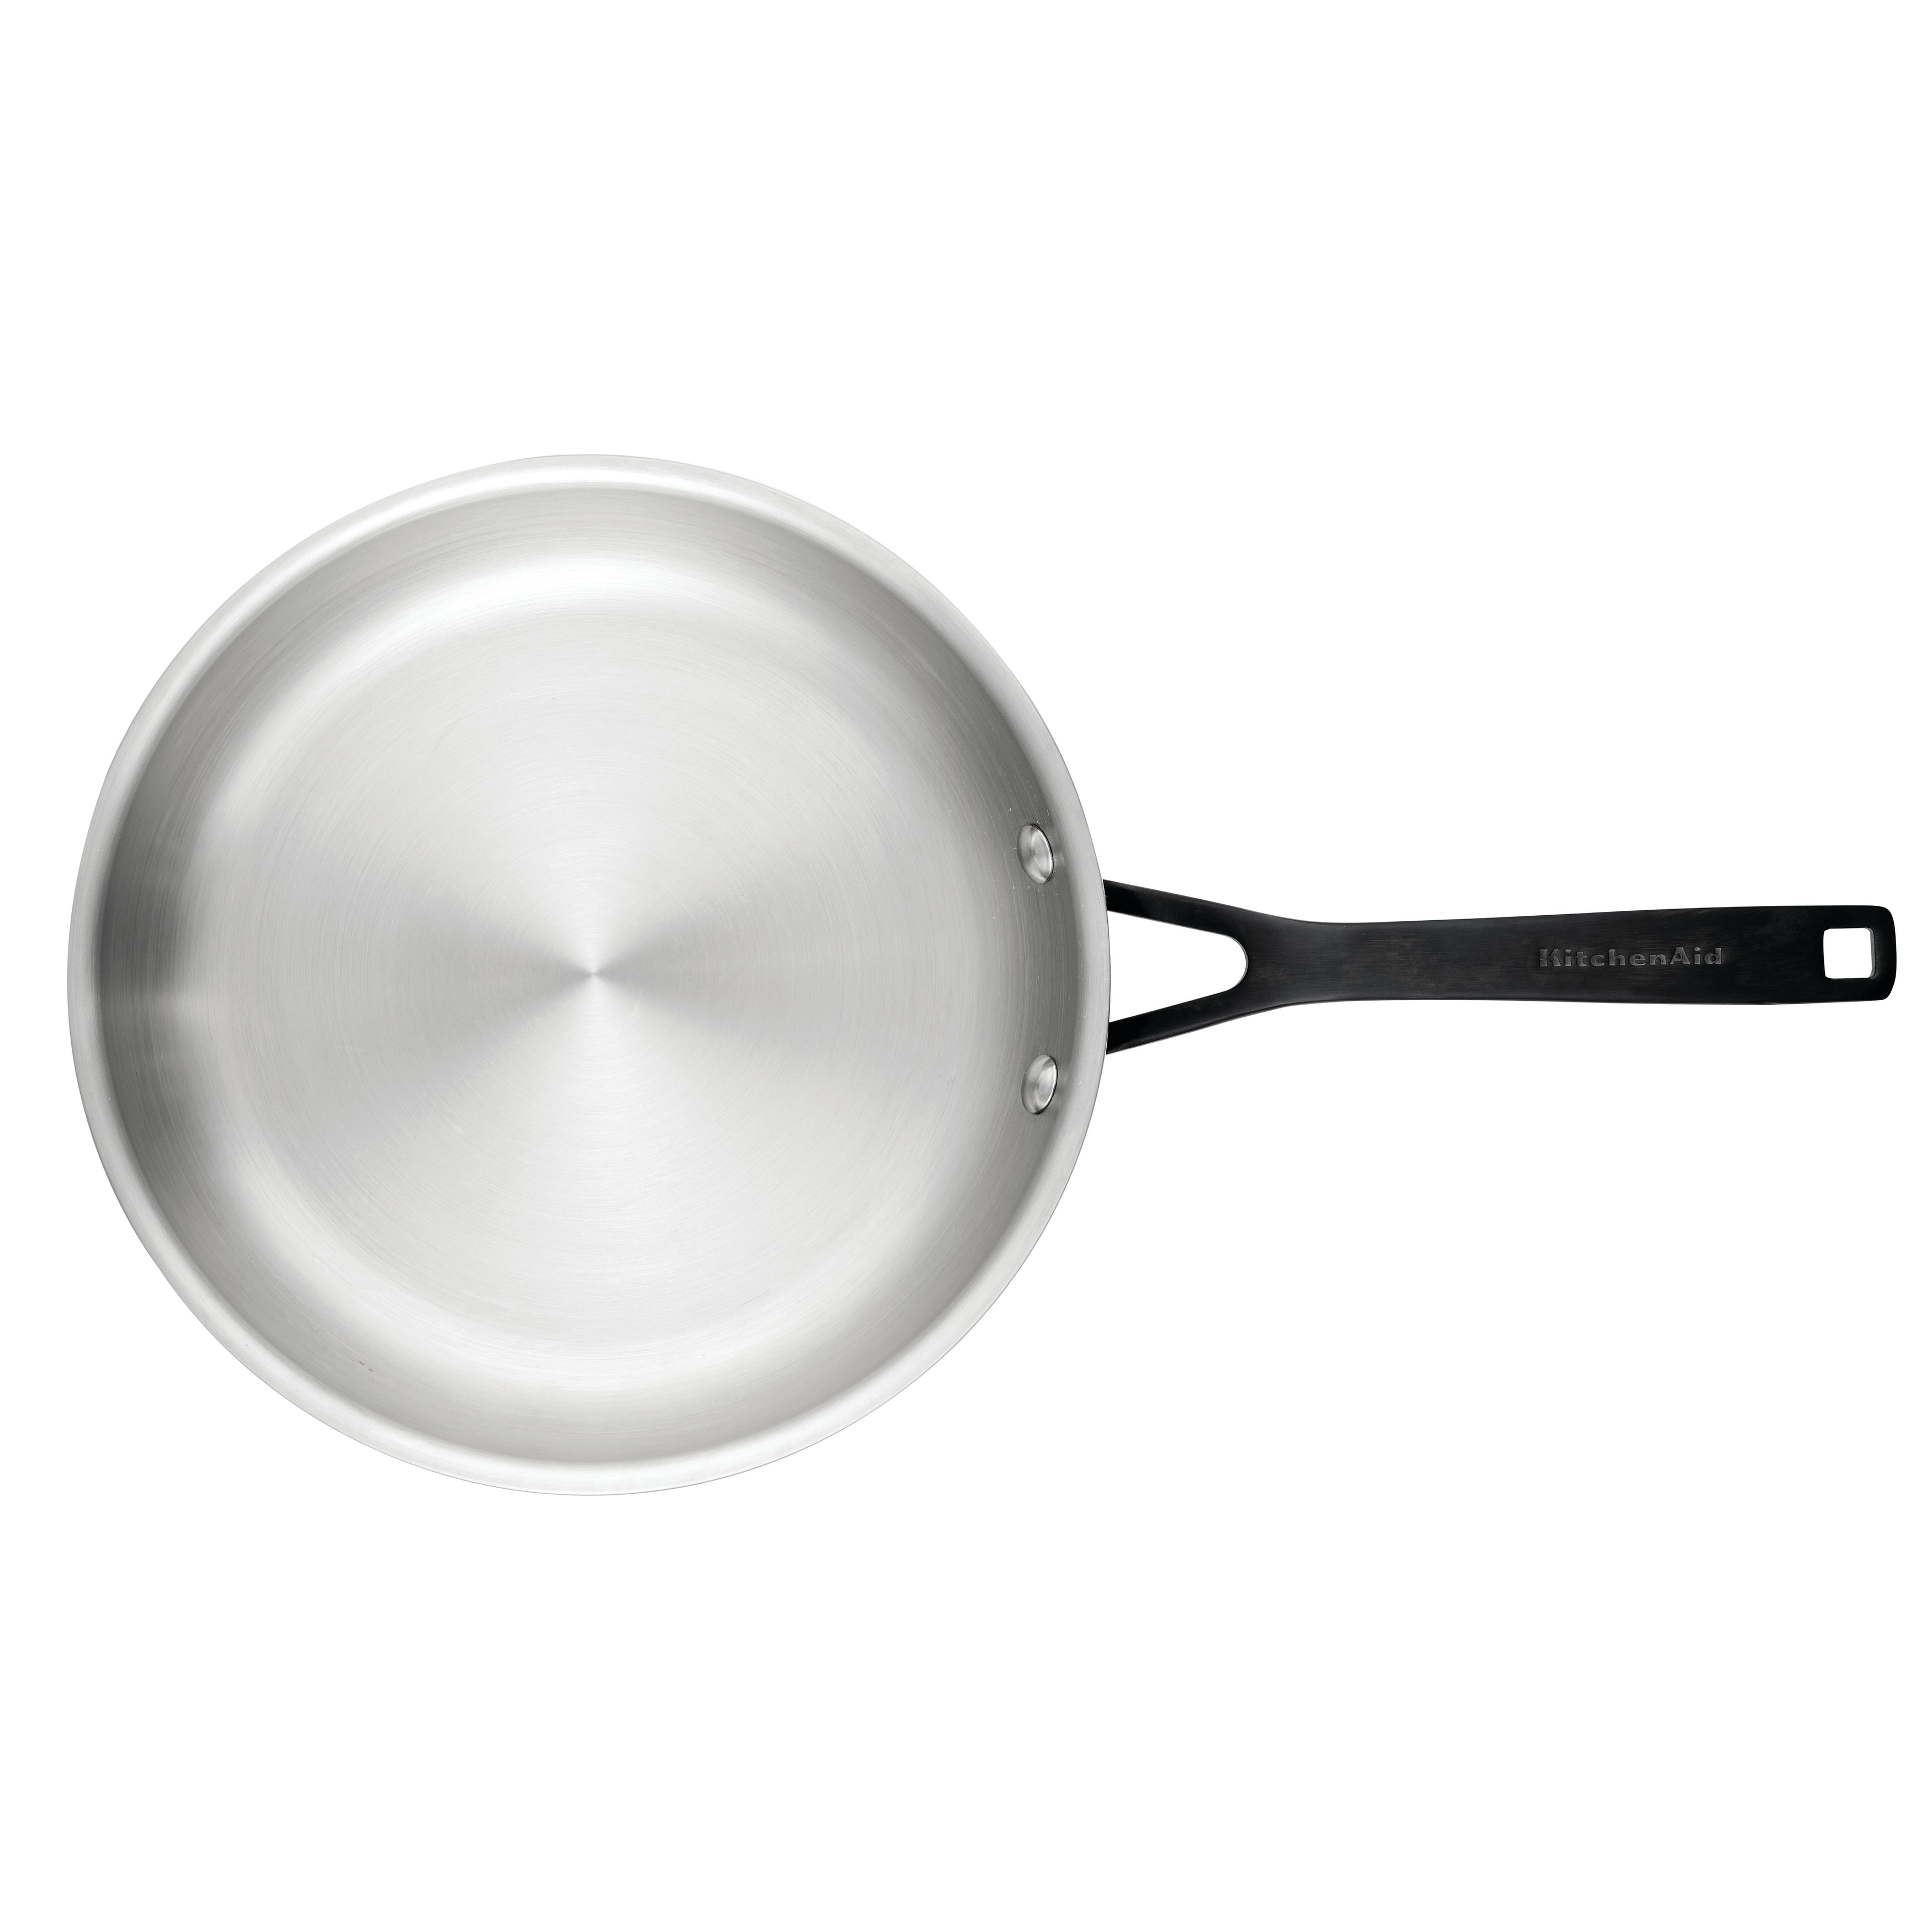 https://ak1.ostkcdn.com/images/products/is/images/direct/d672fb5c95b8ee140dcd5f47a249ecaa4b51c26c/KitchenAid-5-Ply-Clad-Stainless-Steel-Induction-Frying-Pan%2C-10-Inch%2C-Polished-Stainless-Steel.jpg